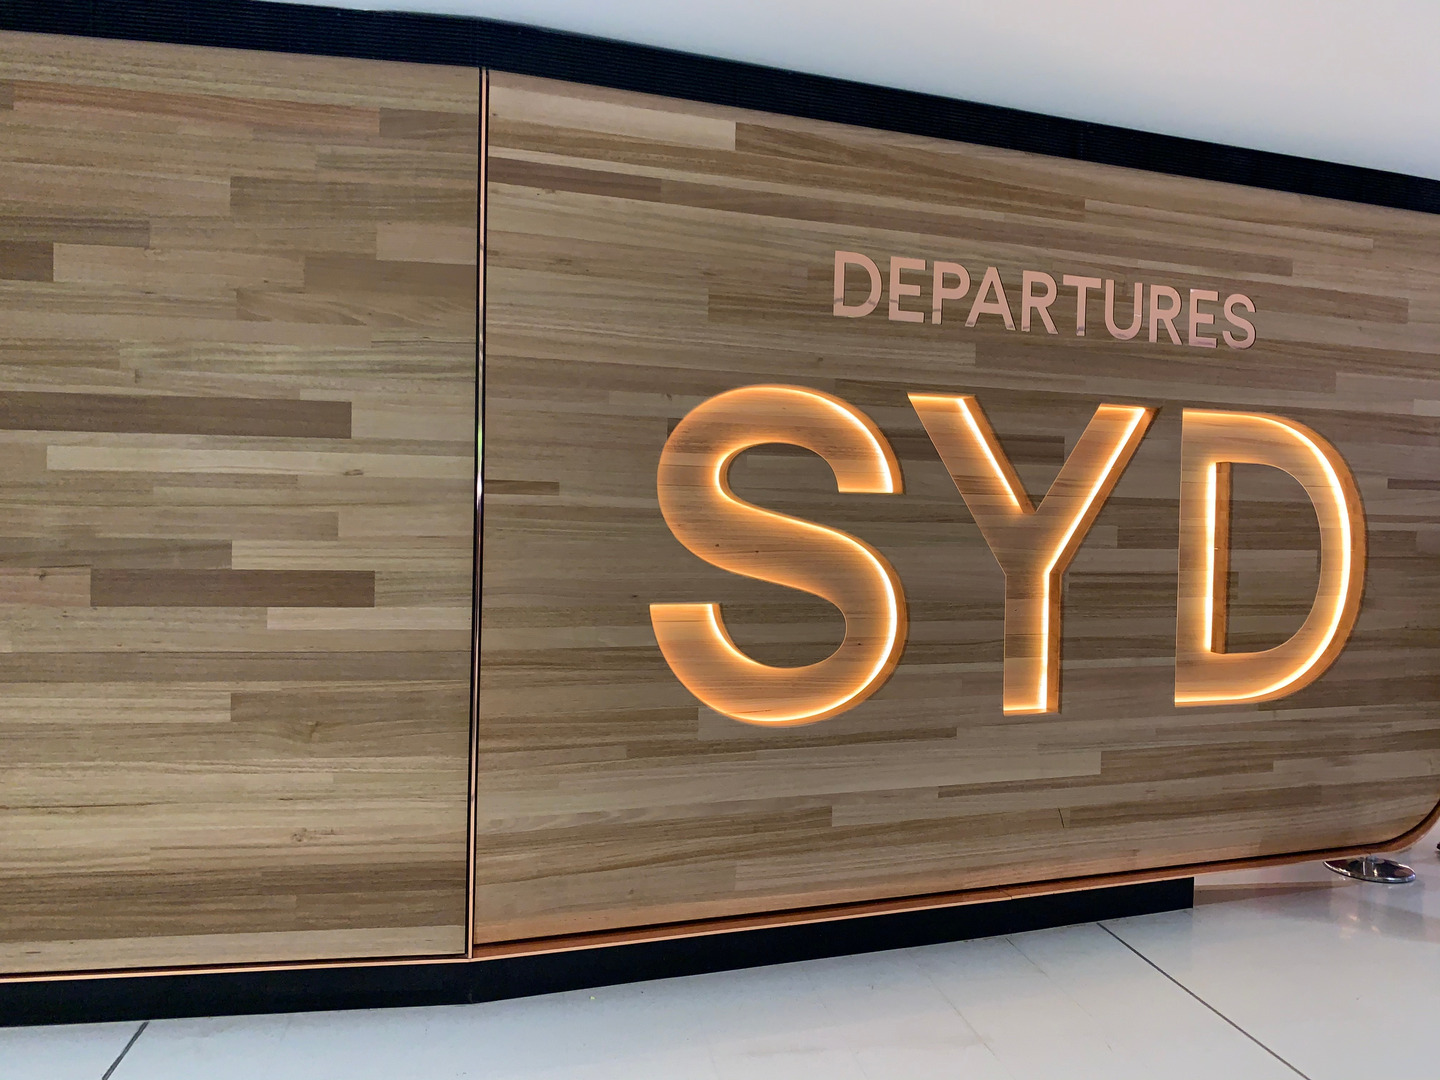 Sydney Airport now uses digital twins.